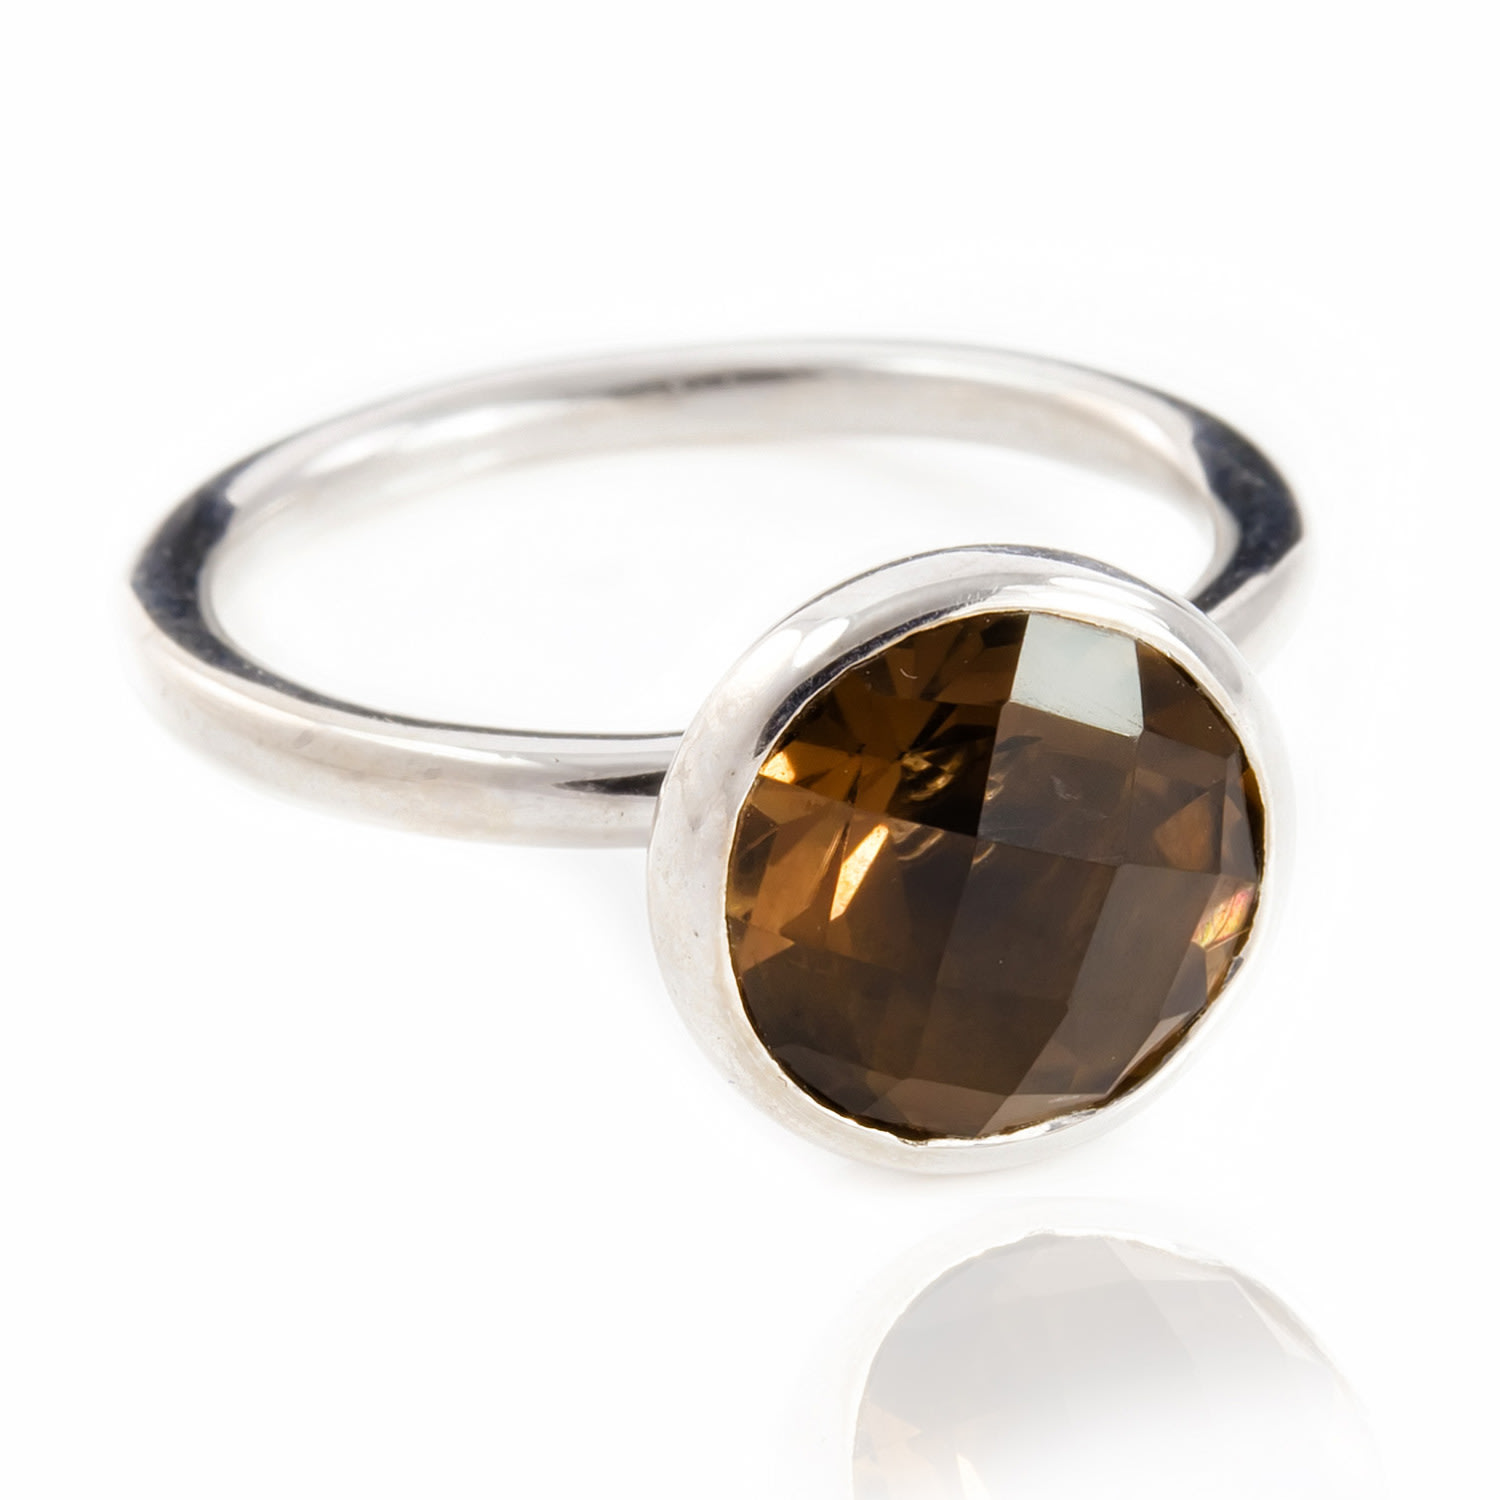 Women’s Silver / Brown Desert Sand Quartz Ring In Sterling Silver The Jewellery Store London